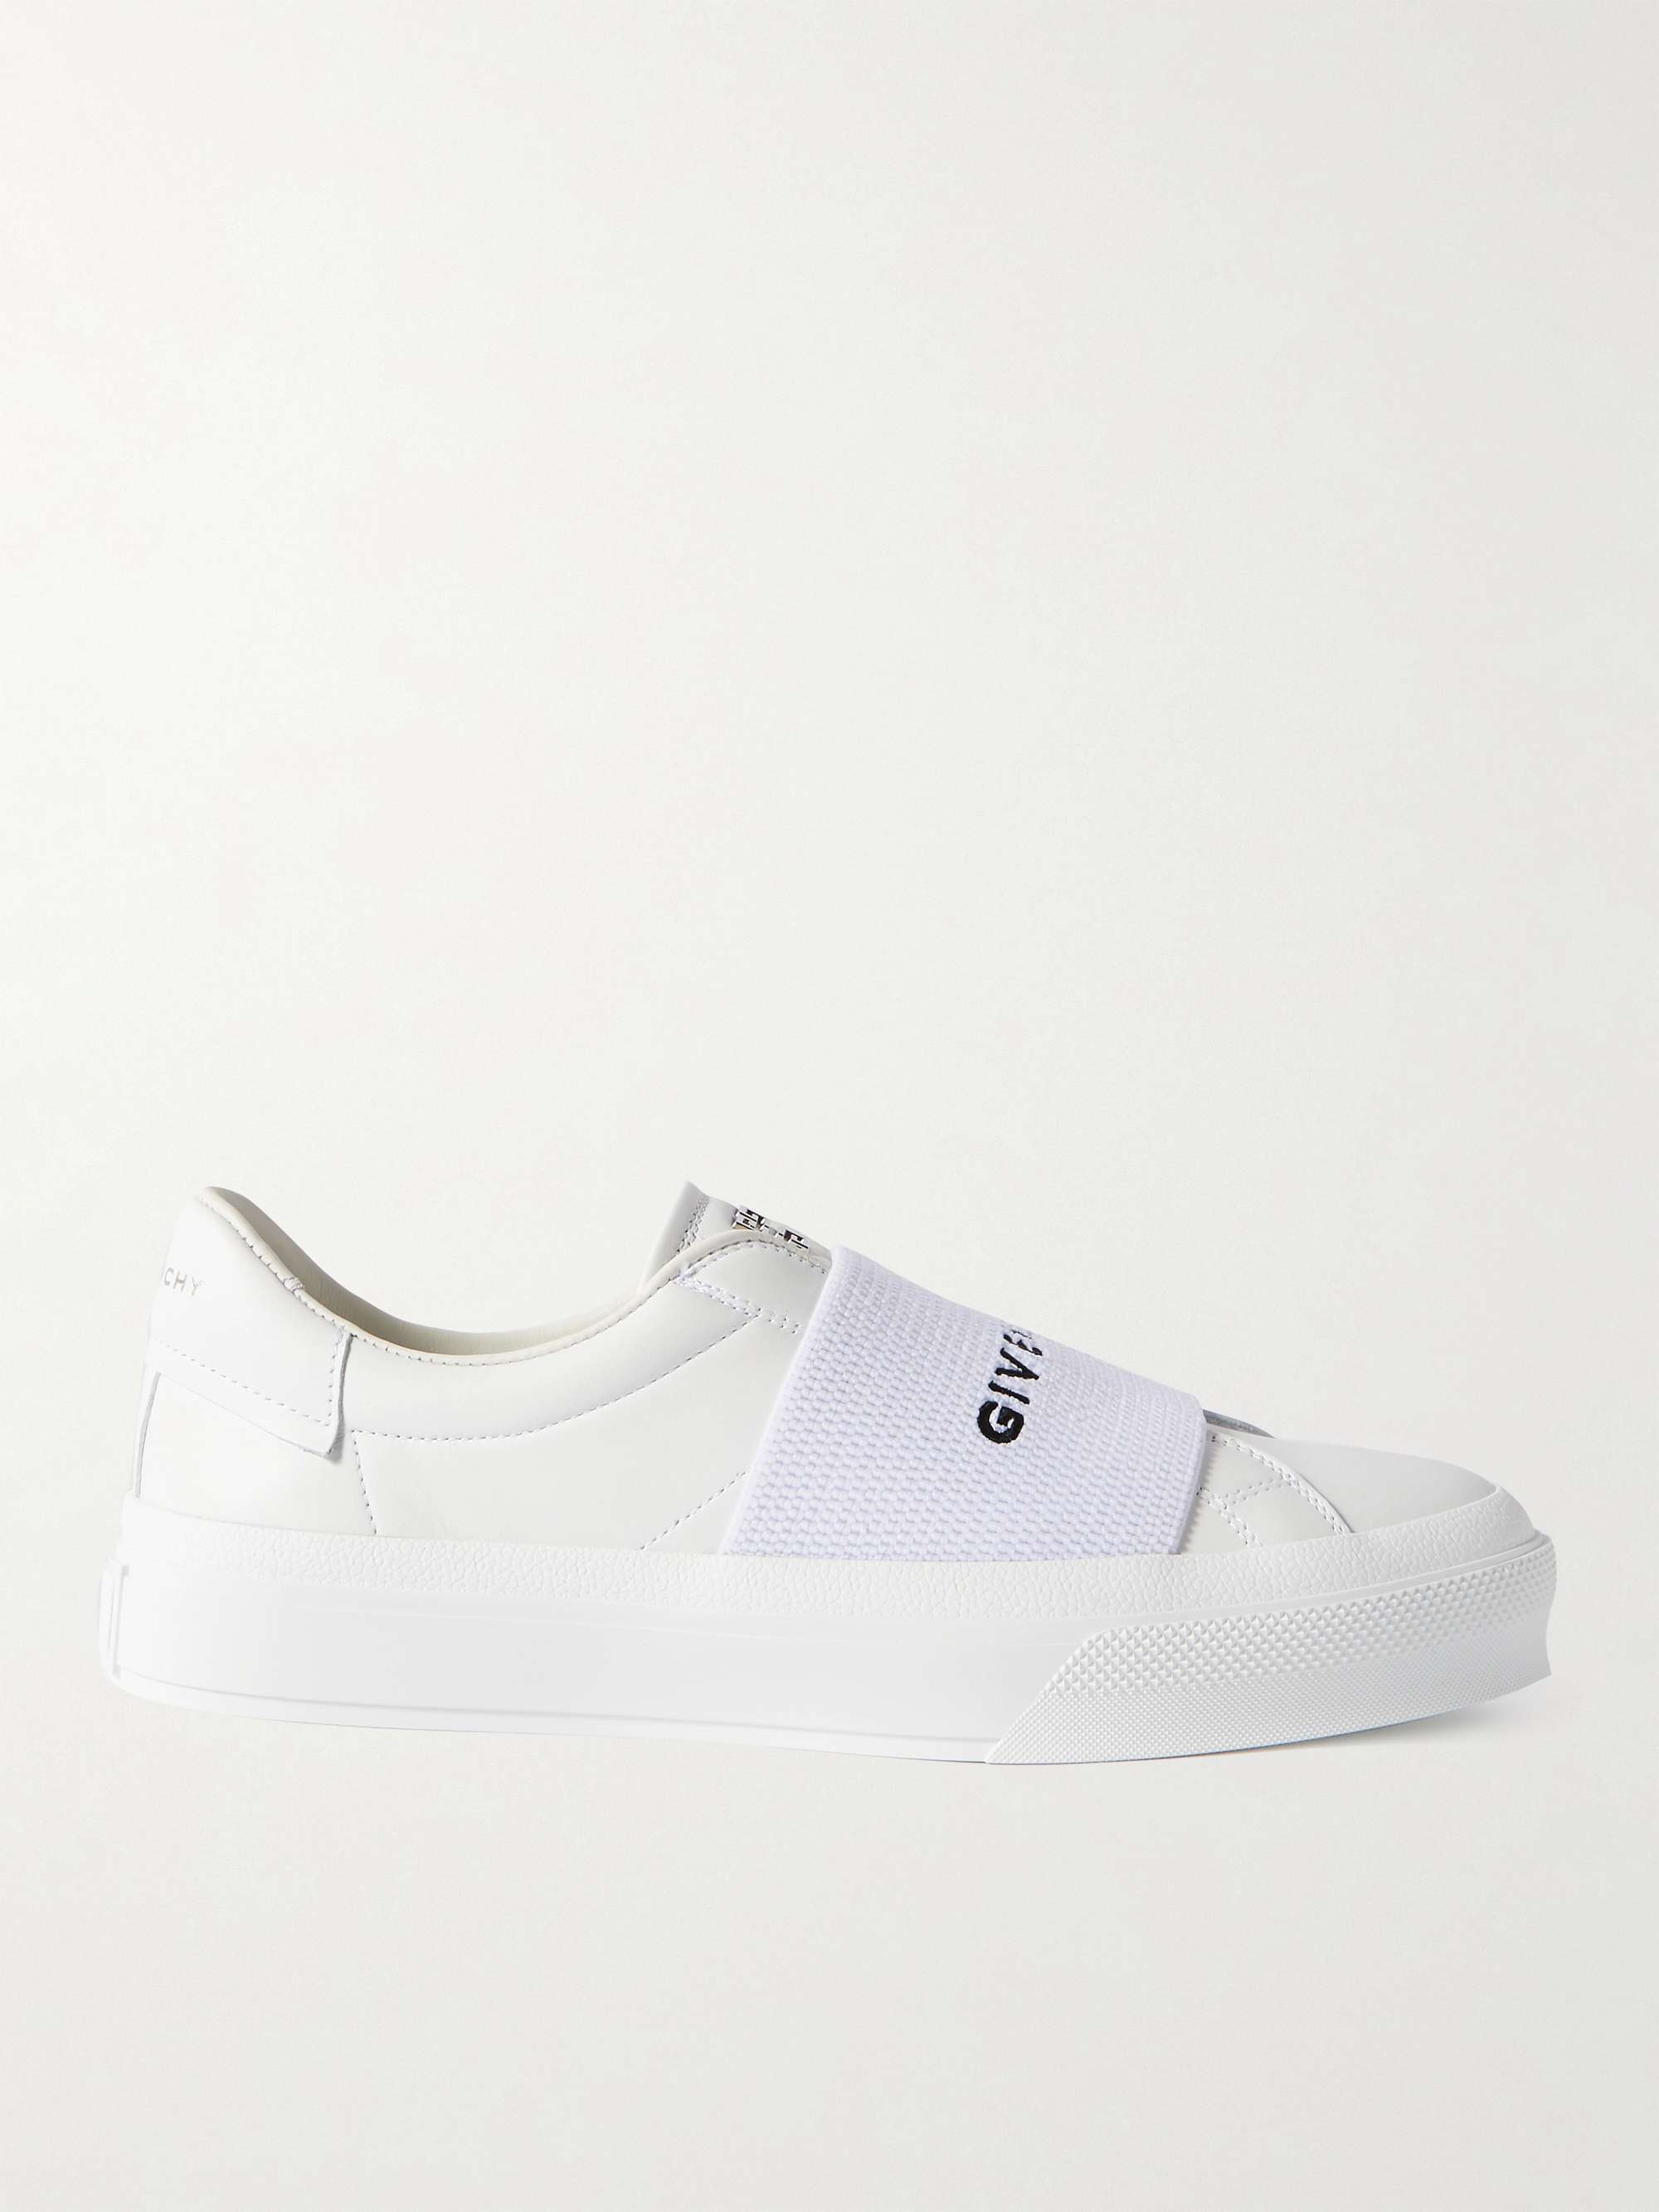 GIVENCHY City Sport Slip-On Leather Sneakers